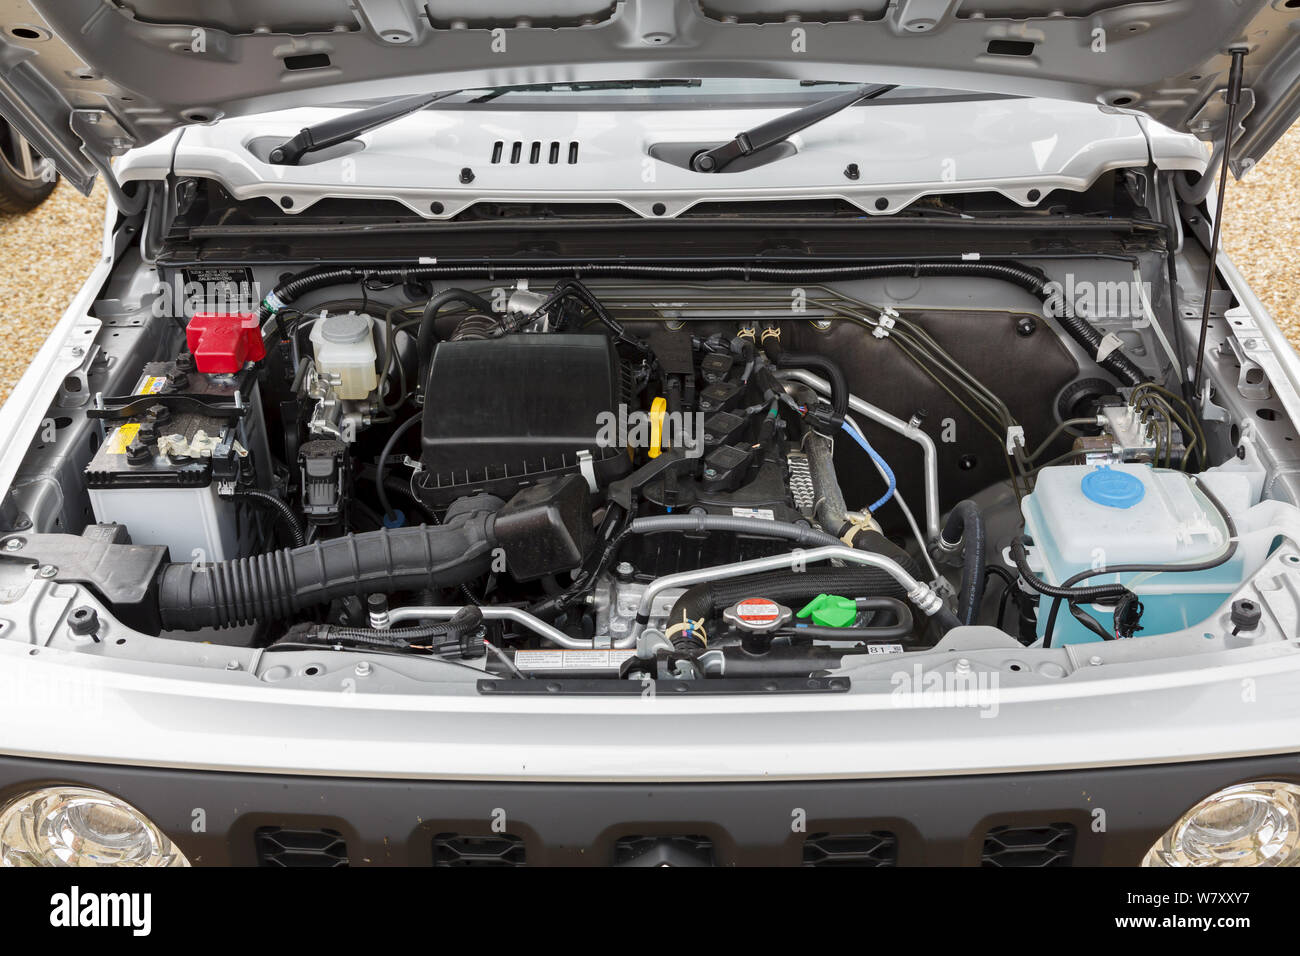 Buckingham, UK - May 16, 2019. Engine compartment underneath the hood or bonnet of a 2019 Suzuki Jimny. The engine is a 1.5L petrol. Stock Photo